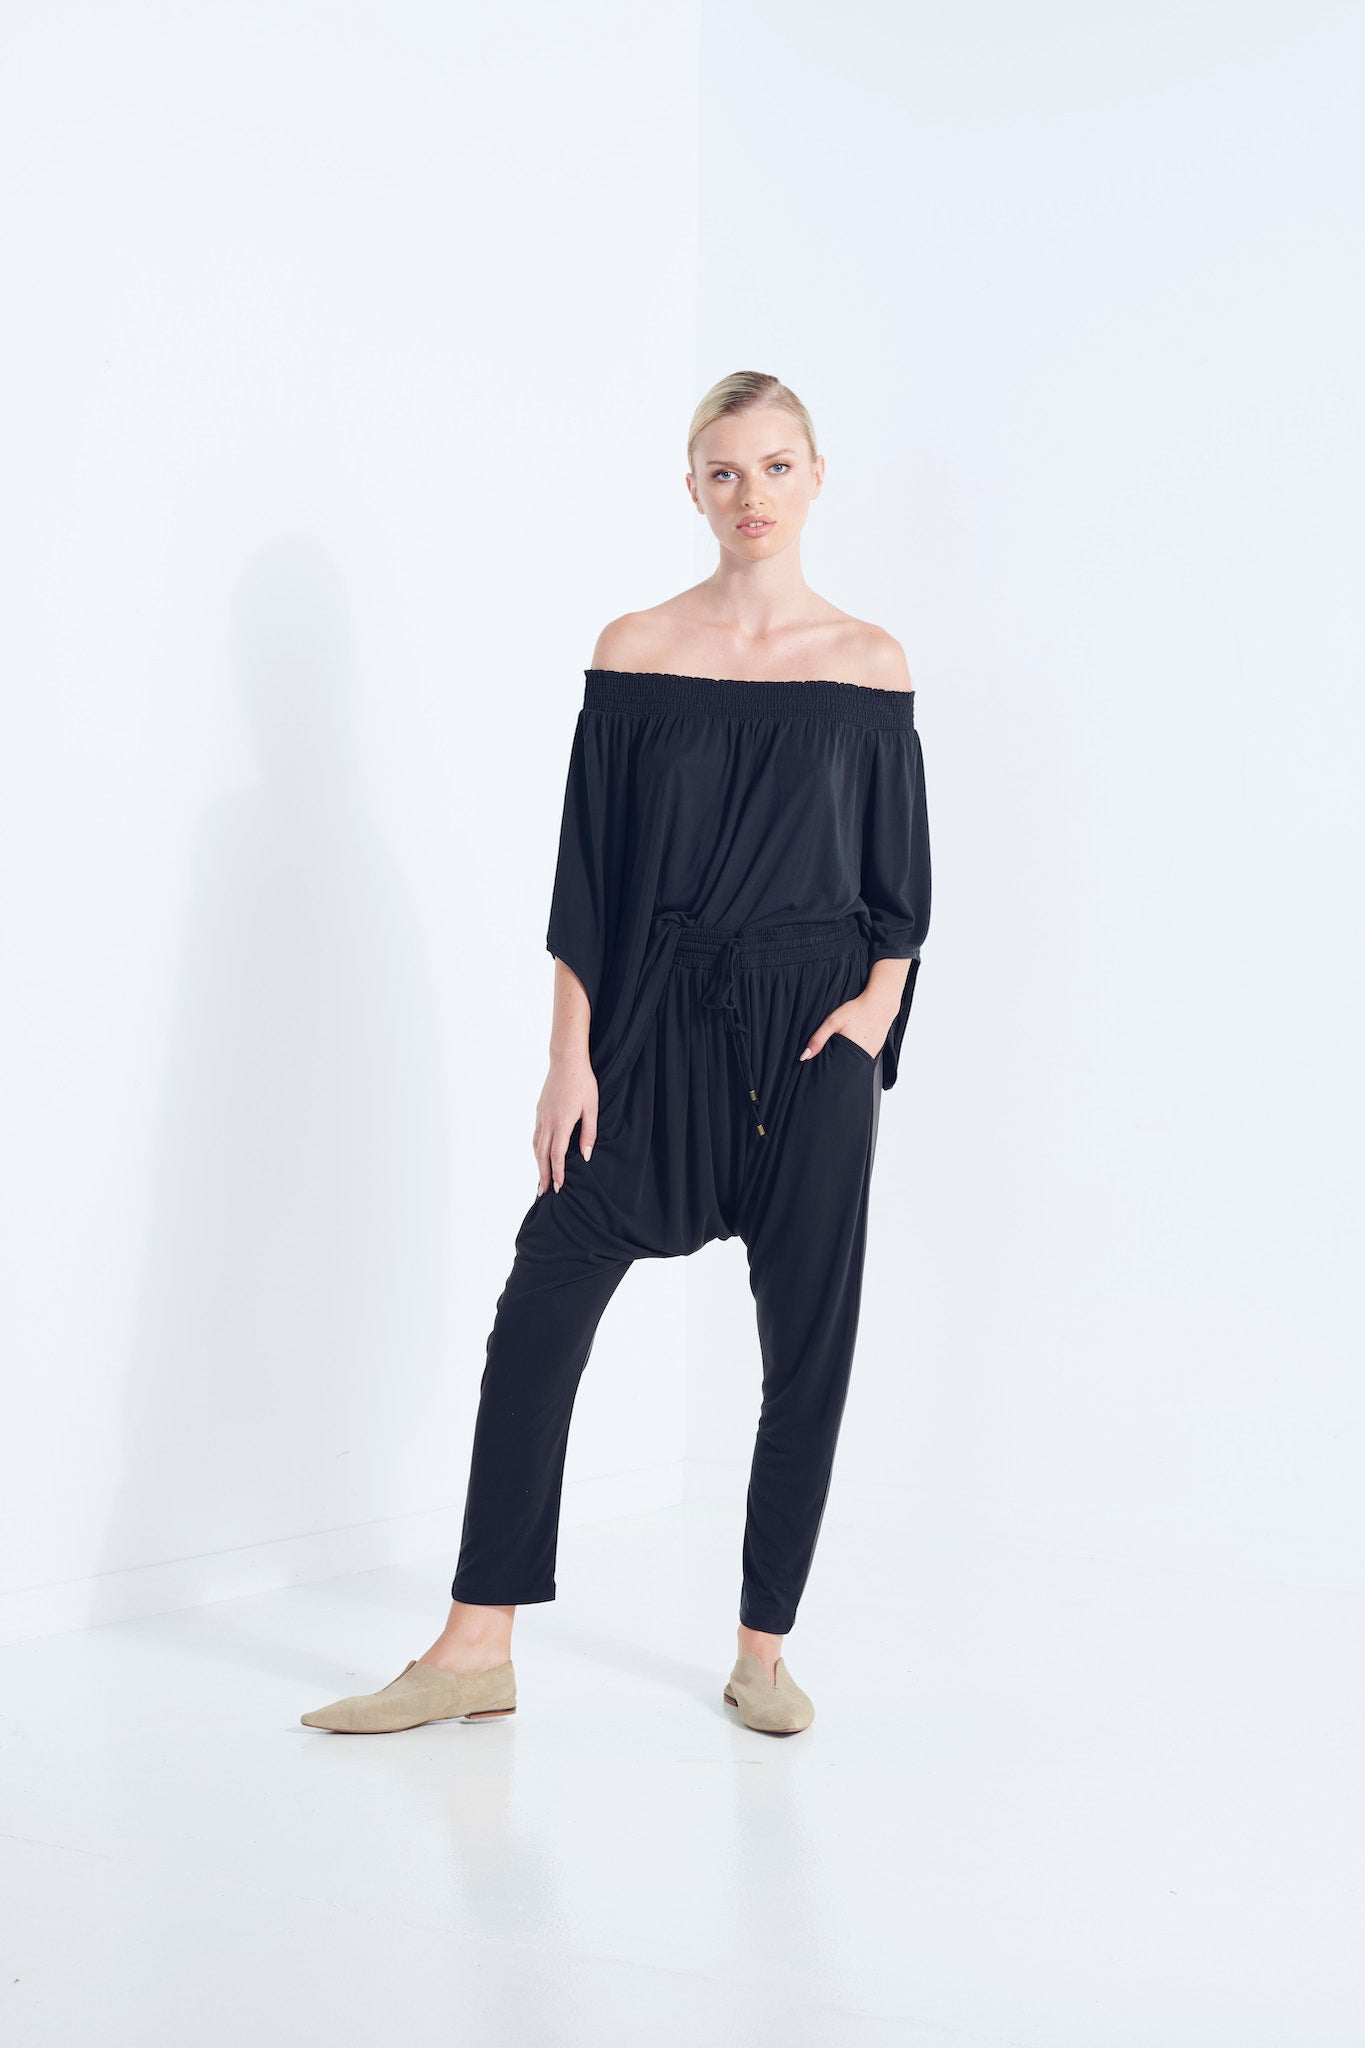 NAEVIA OFF SHOULDER TOP KNIT BEECHWOOD MODAL ELASTIC TOP WITH BELL SLEEVE DARK WASHED BLACK RELAXED FRONT VIEW